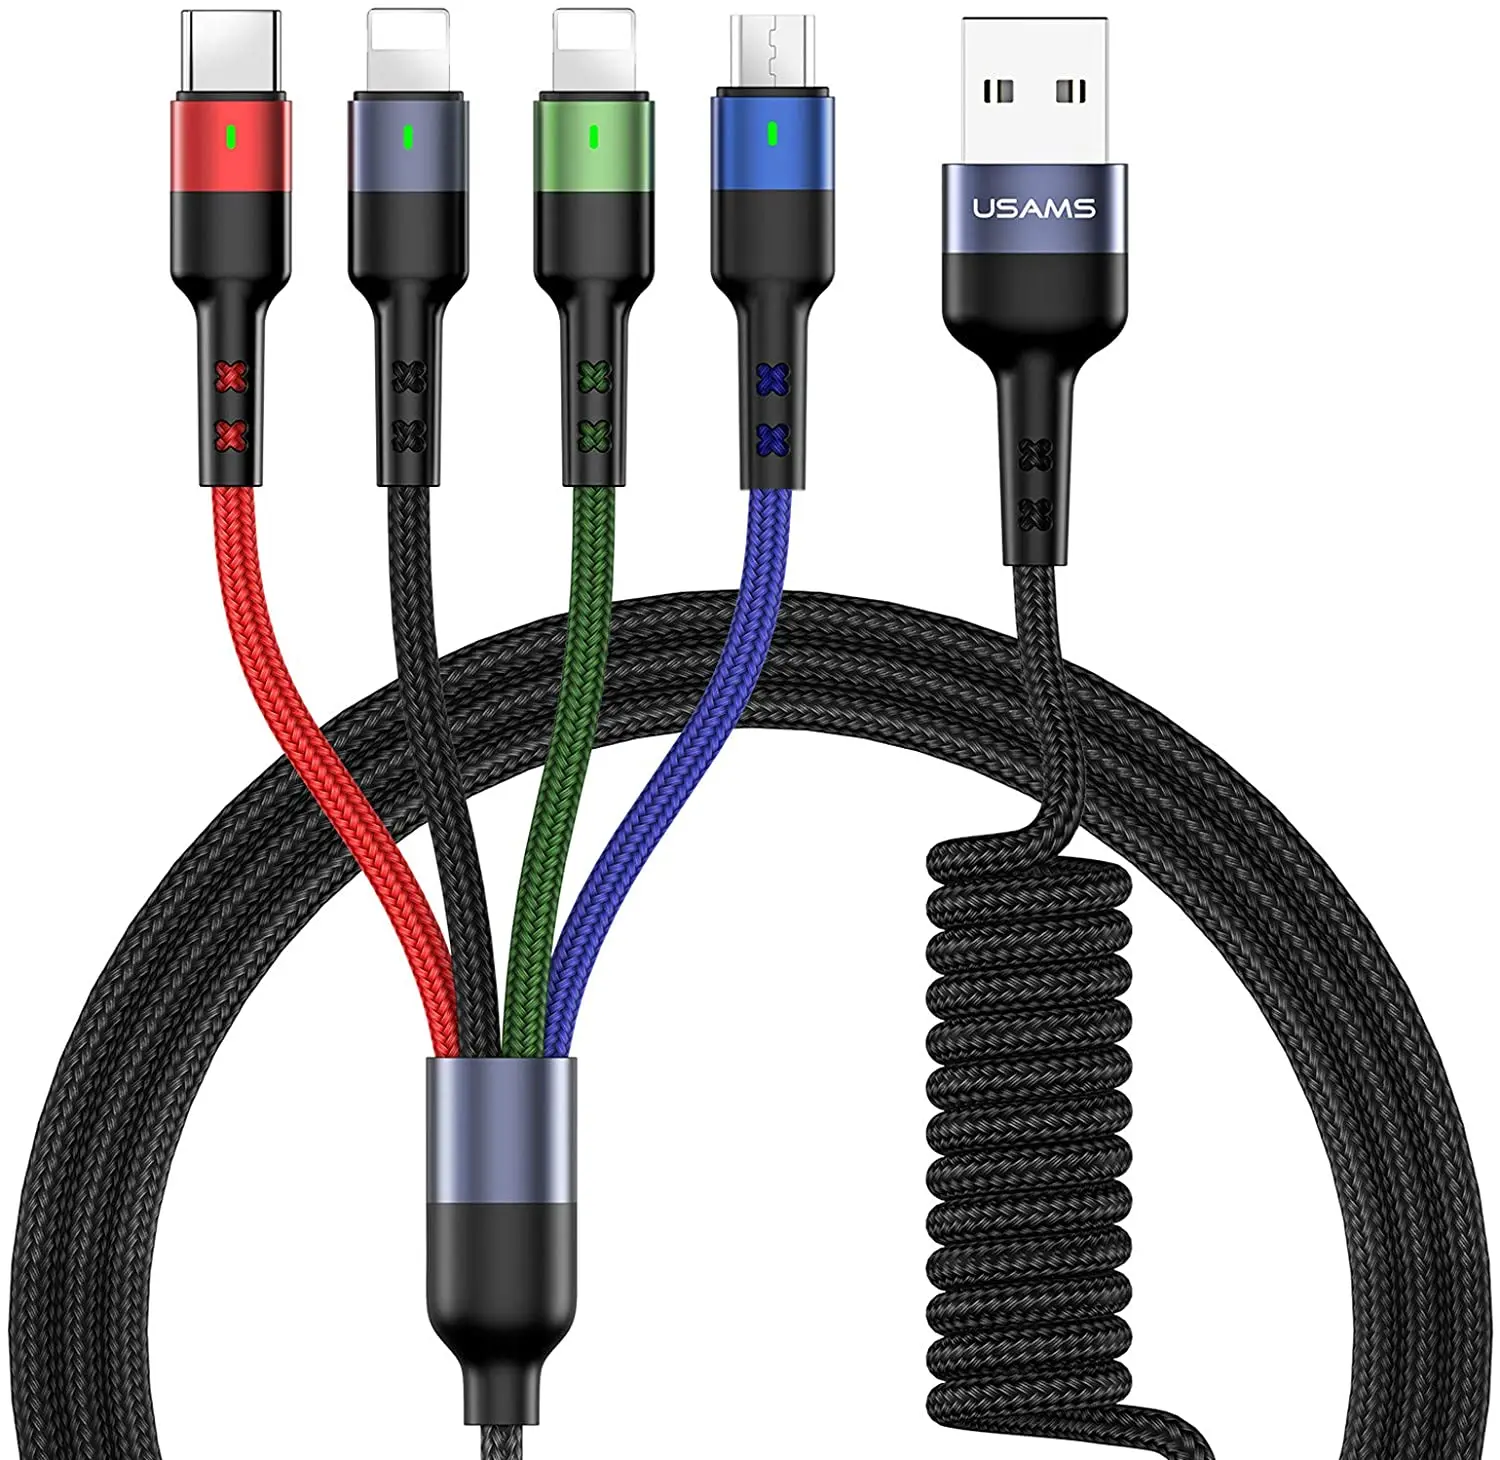 

USAMS Wholesale US-SJ349 Aluminum Alloy 2A 4IN1 Spring Braided 1.5m Charging USB Cable, Black